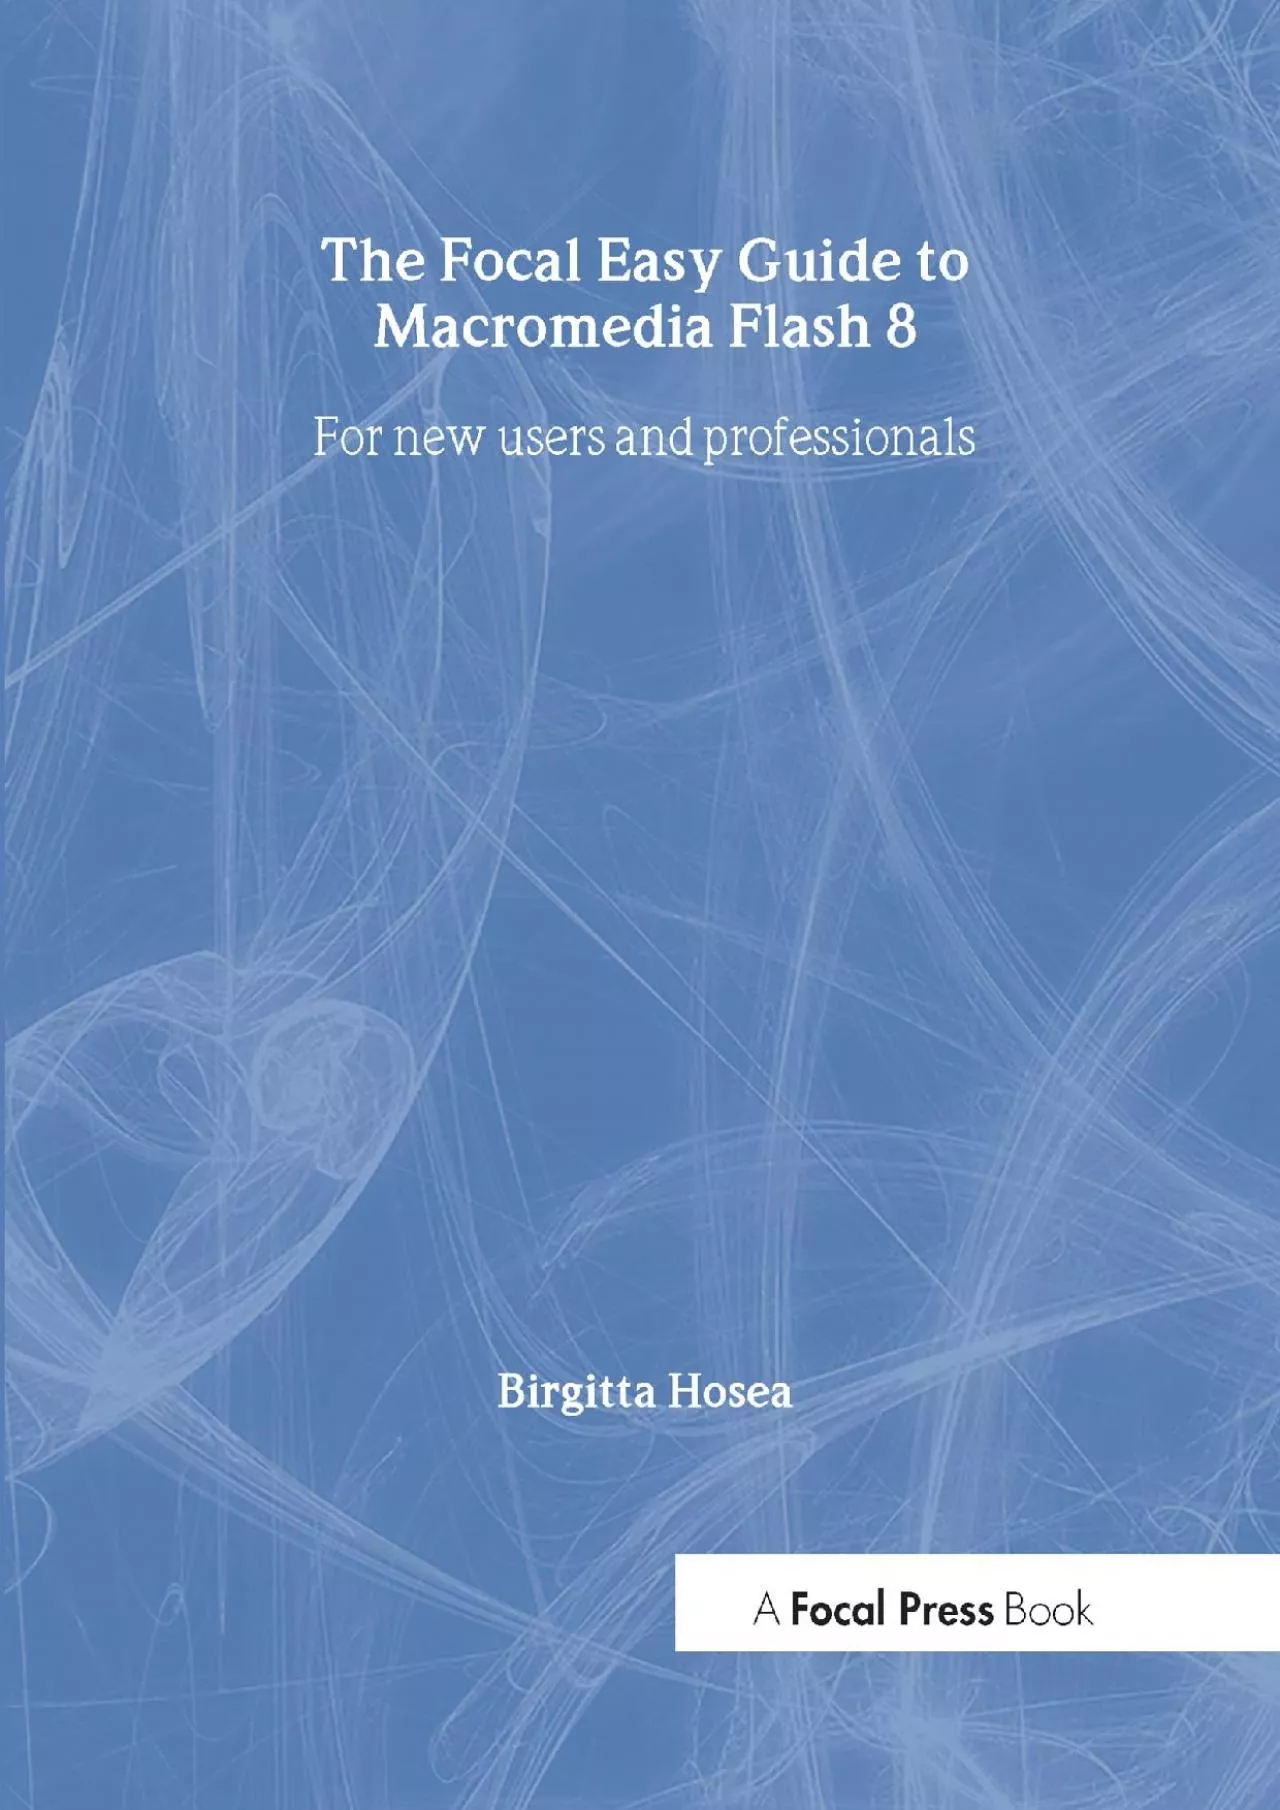 (EBOOK)-Focal Easy Guide to Macromedia Flash 8: For new users and professionals (The Focal